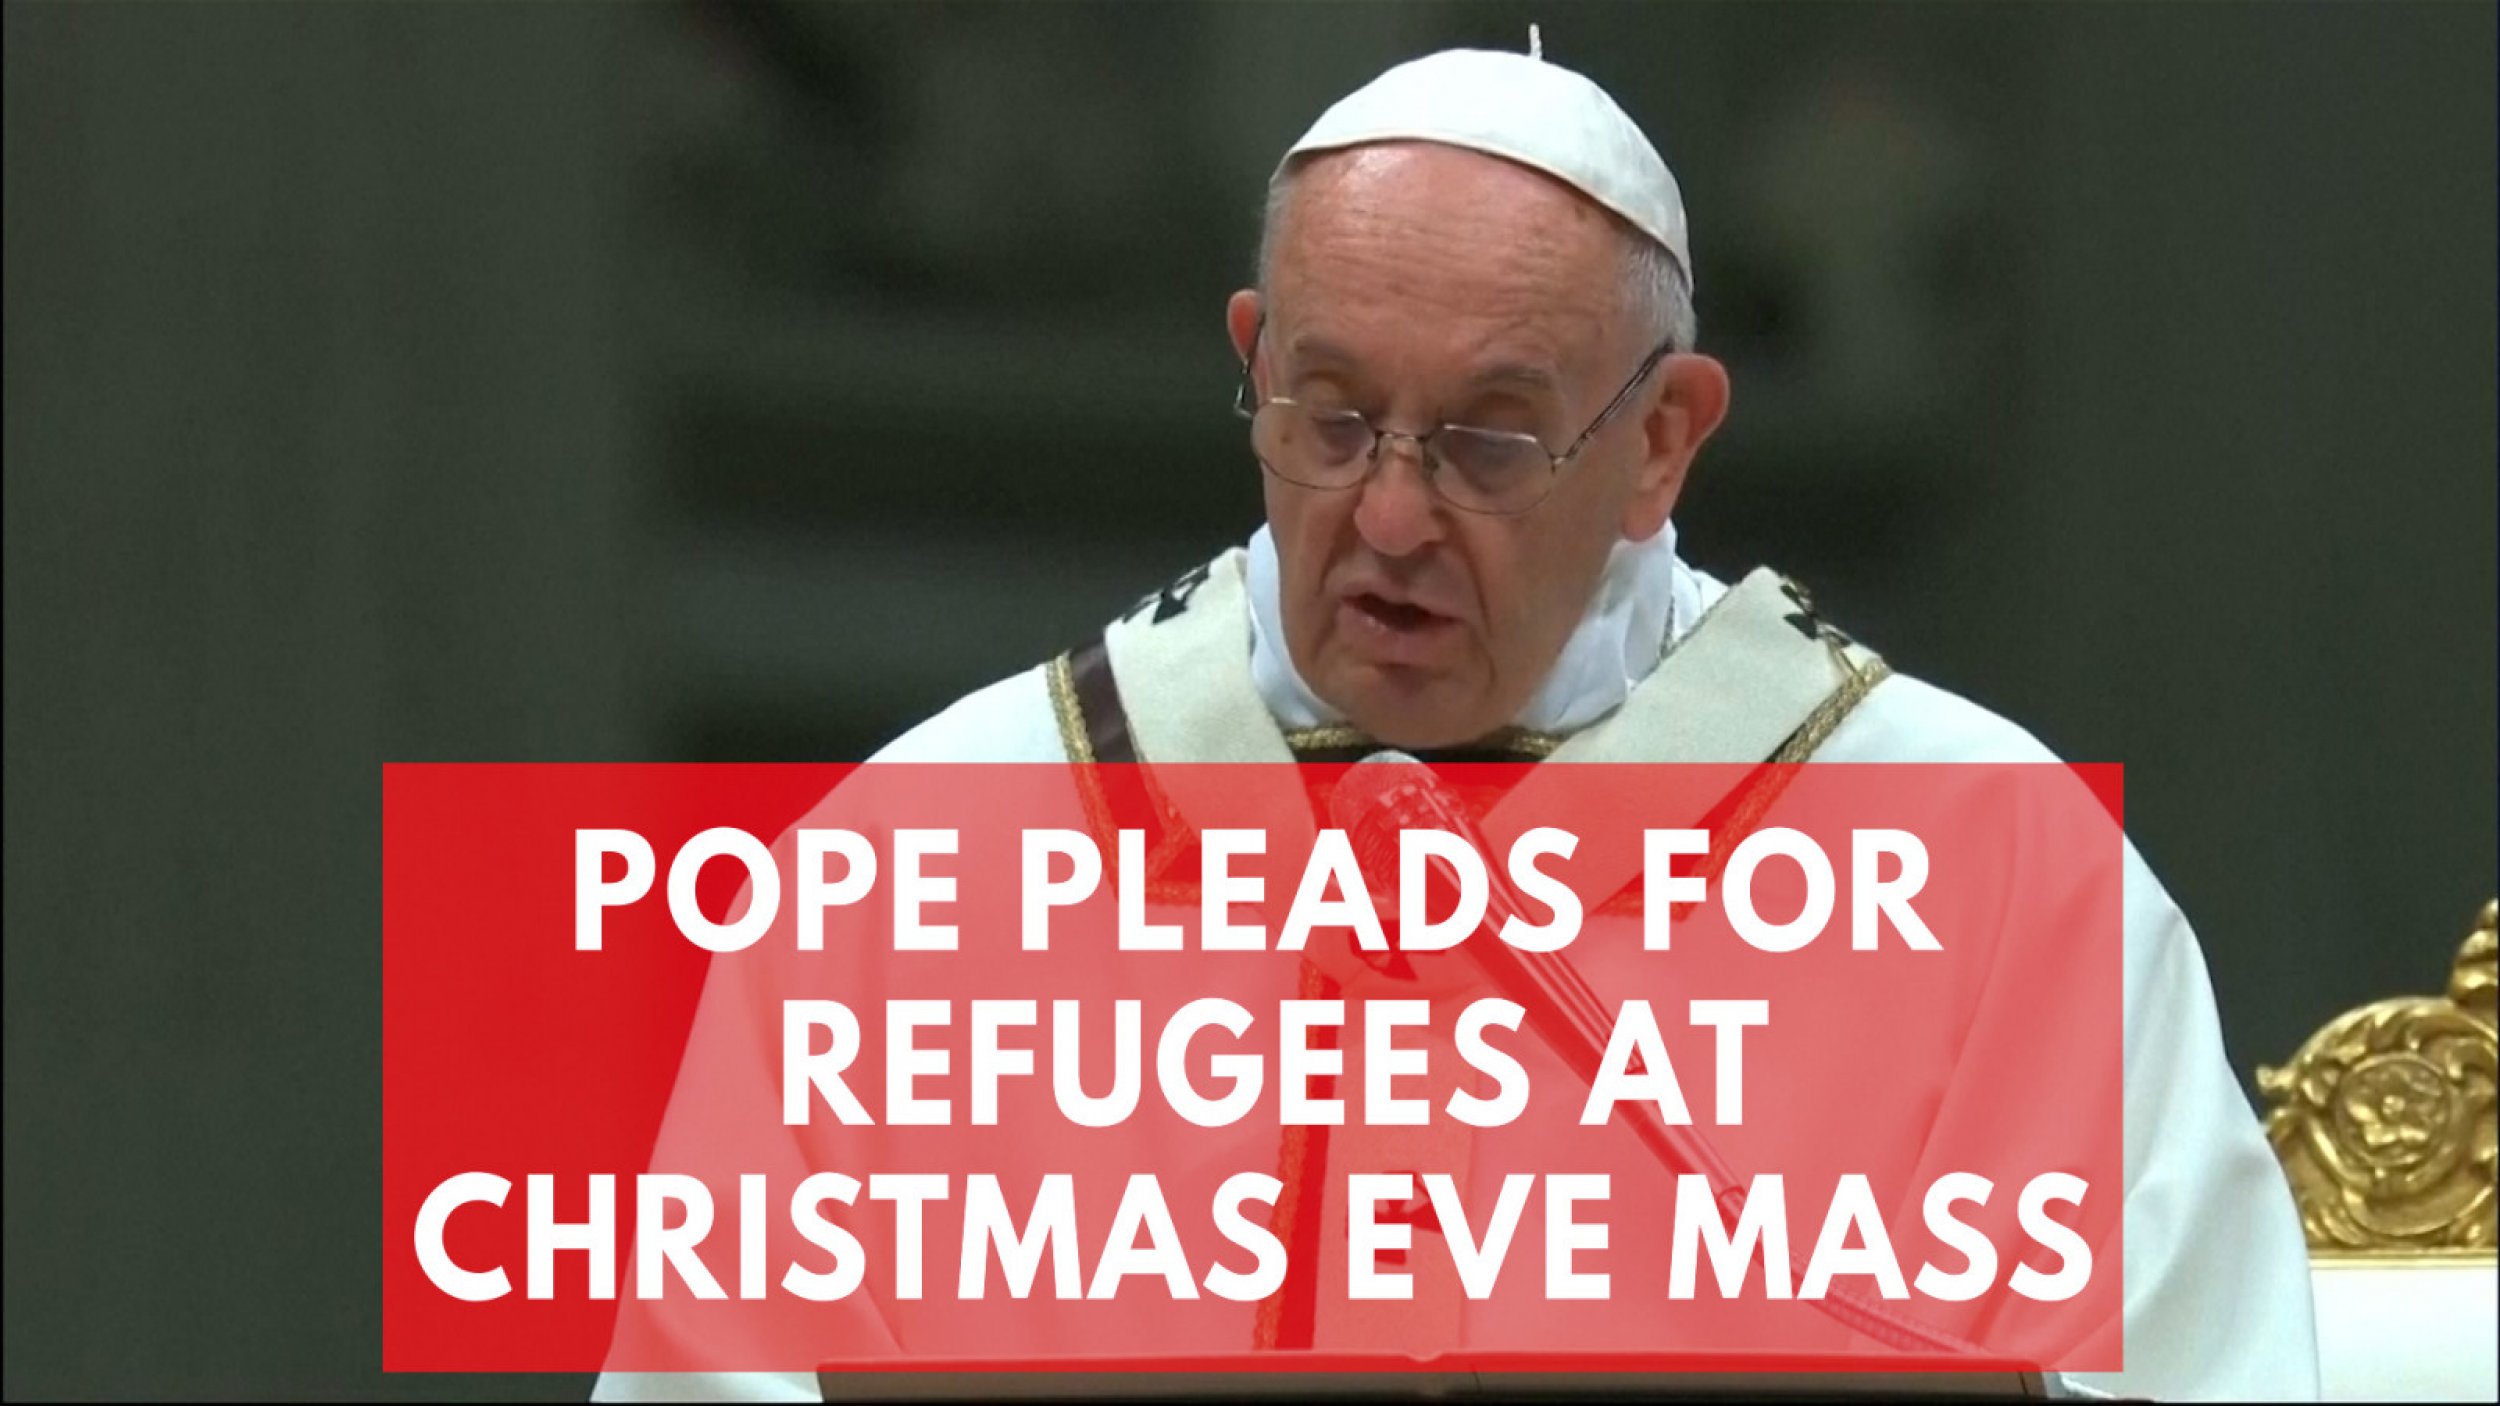 Pope Francis Pleads For Migrants Driven From Their Land At Christmas Eve Mass